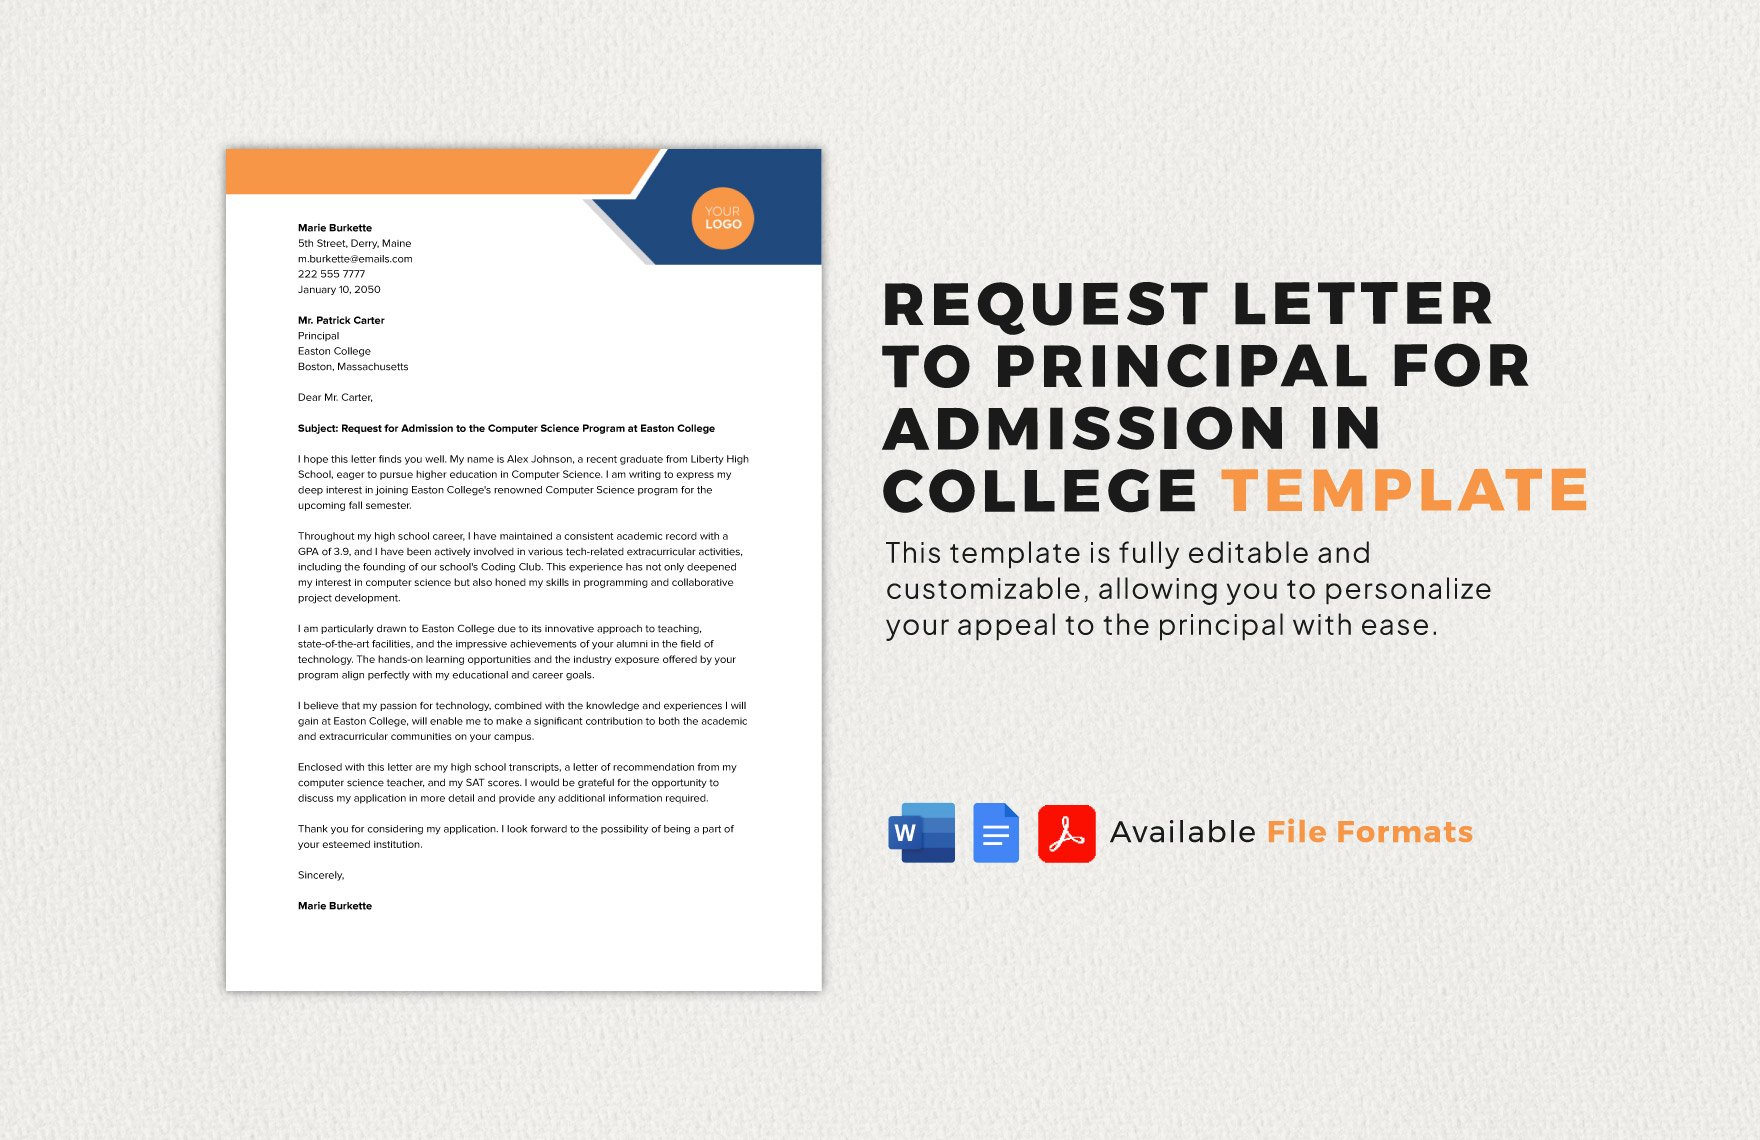 Request Letter to Principal for Admission in College Template